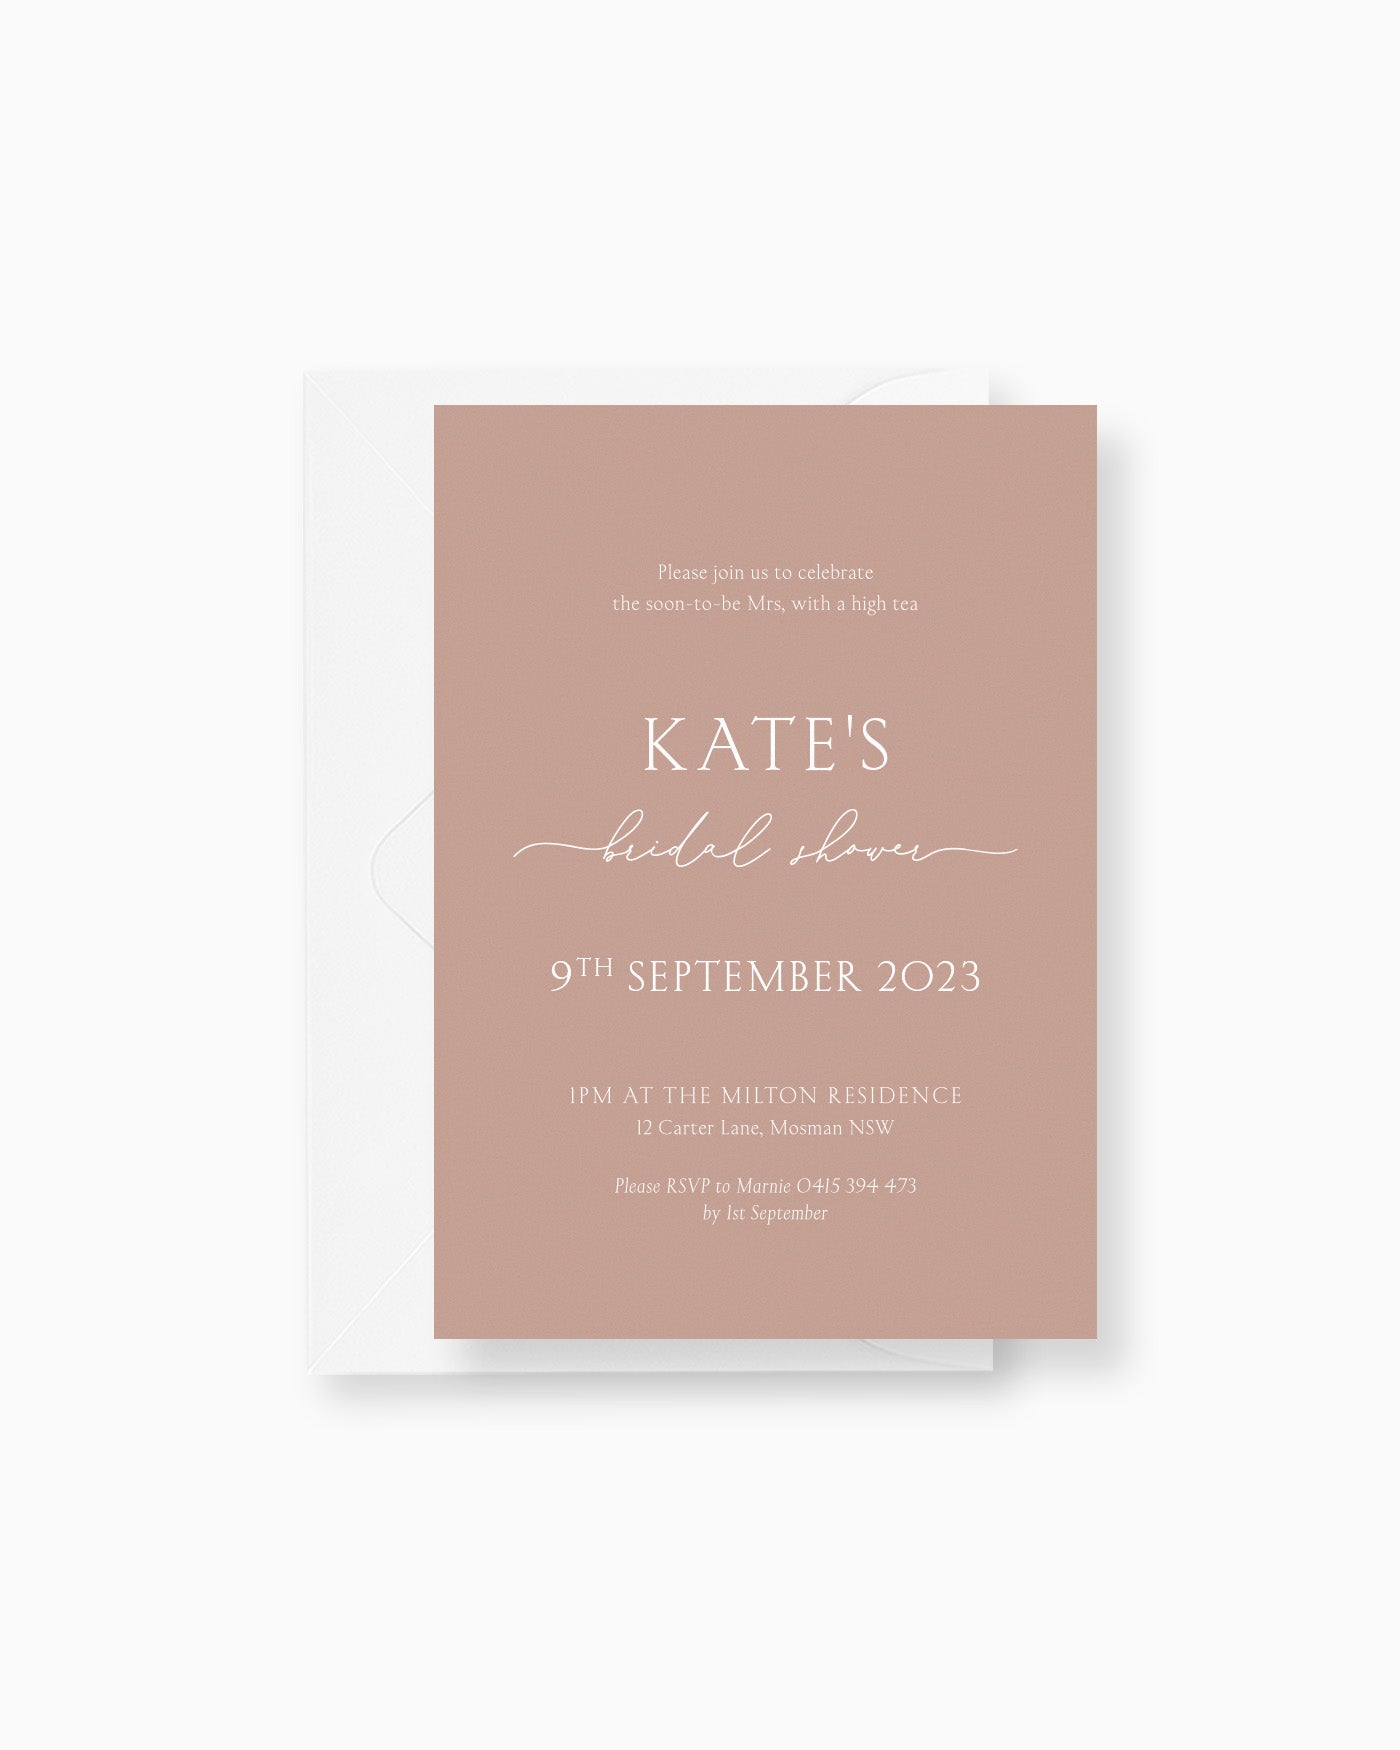 Peppermint Press Stationery Suite Balmoral Bridal Shower Invite